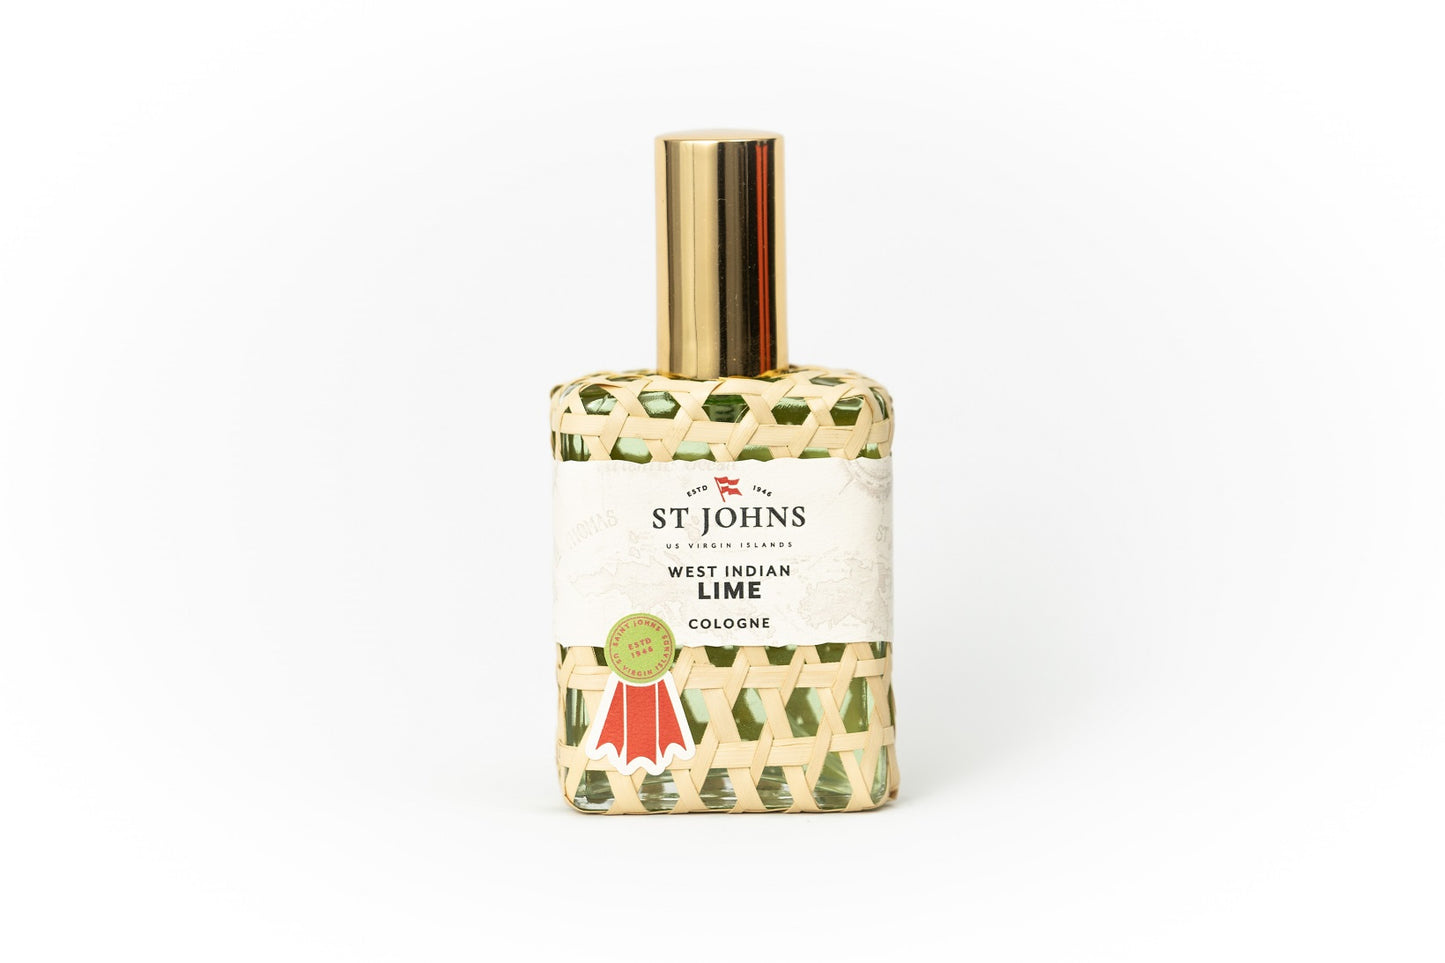 St Johns West Indian Lime Cologne 4 oz. Spray